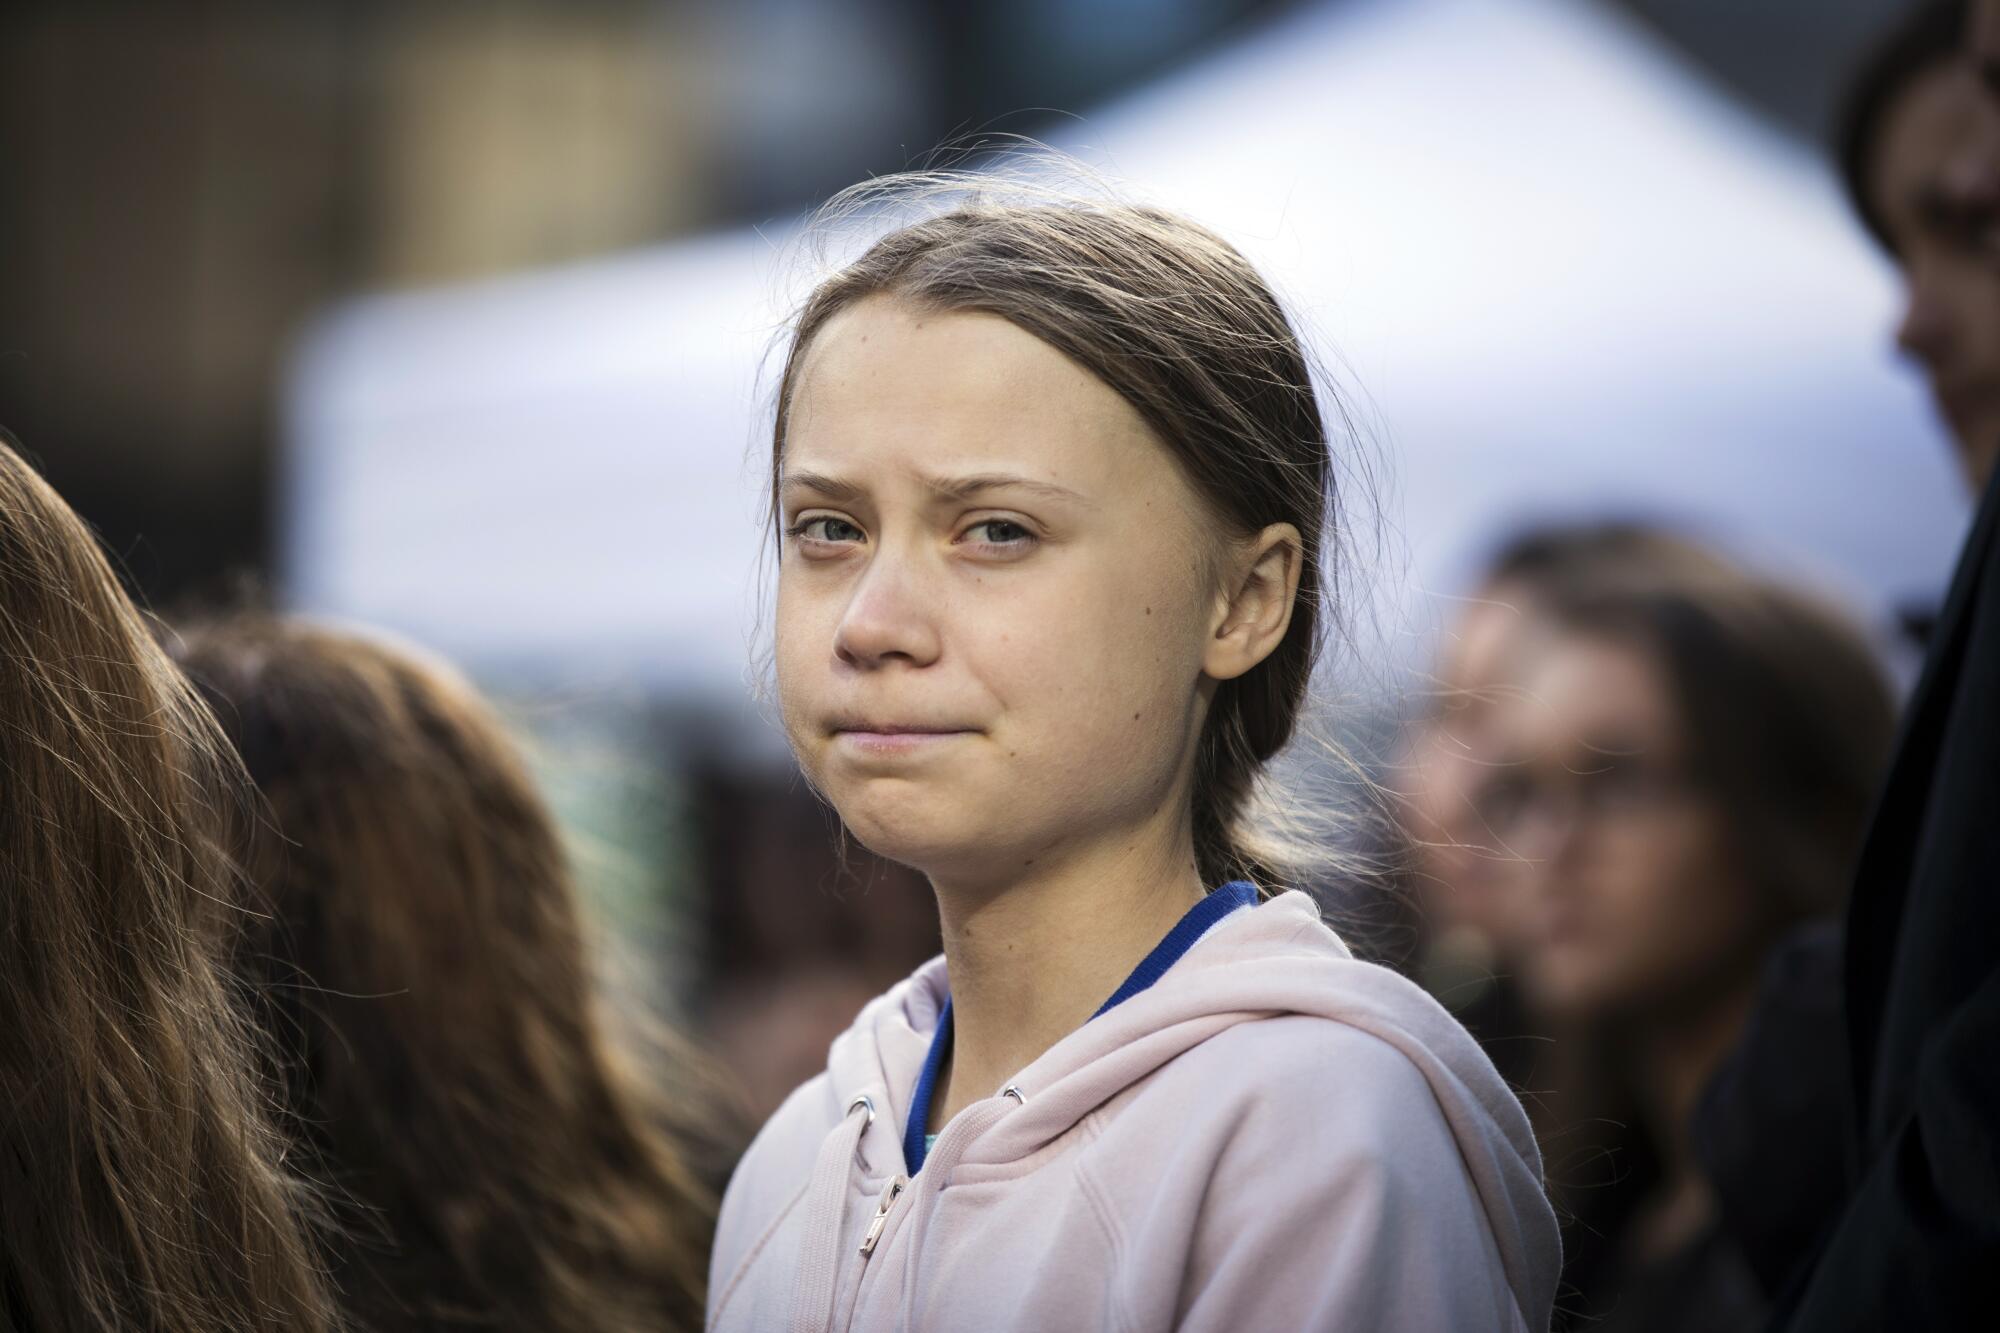 Swedish climate activist Greta Thunberg stands amid a crowd, scowling.